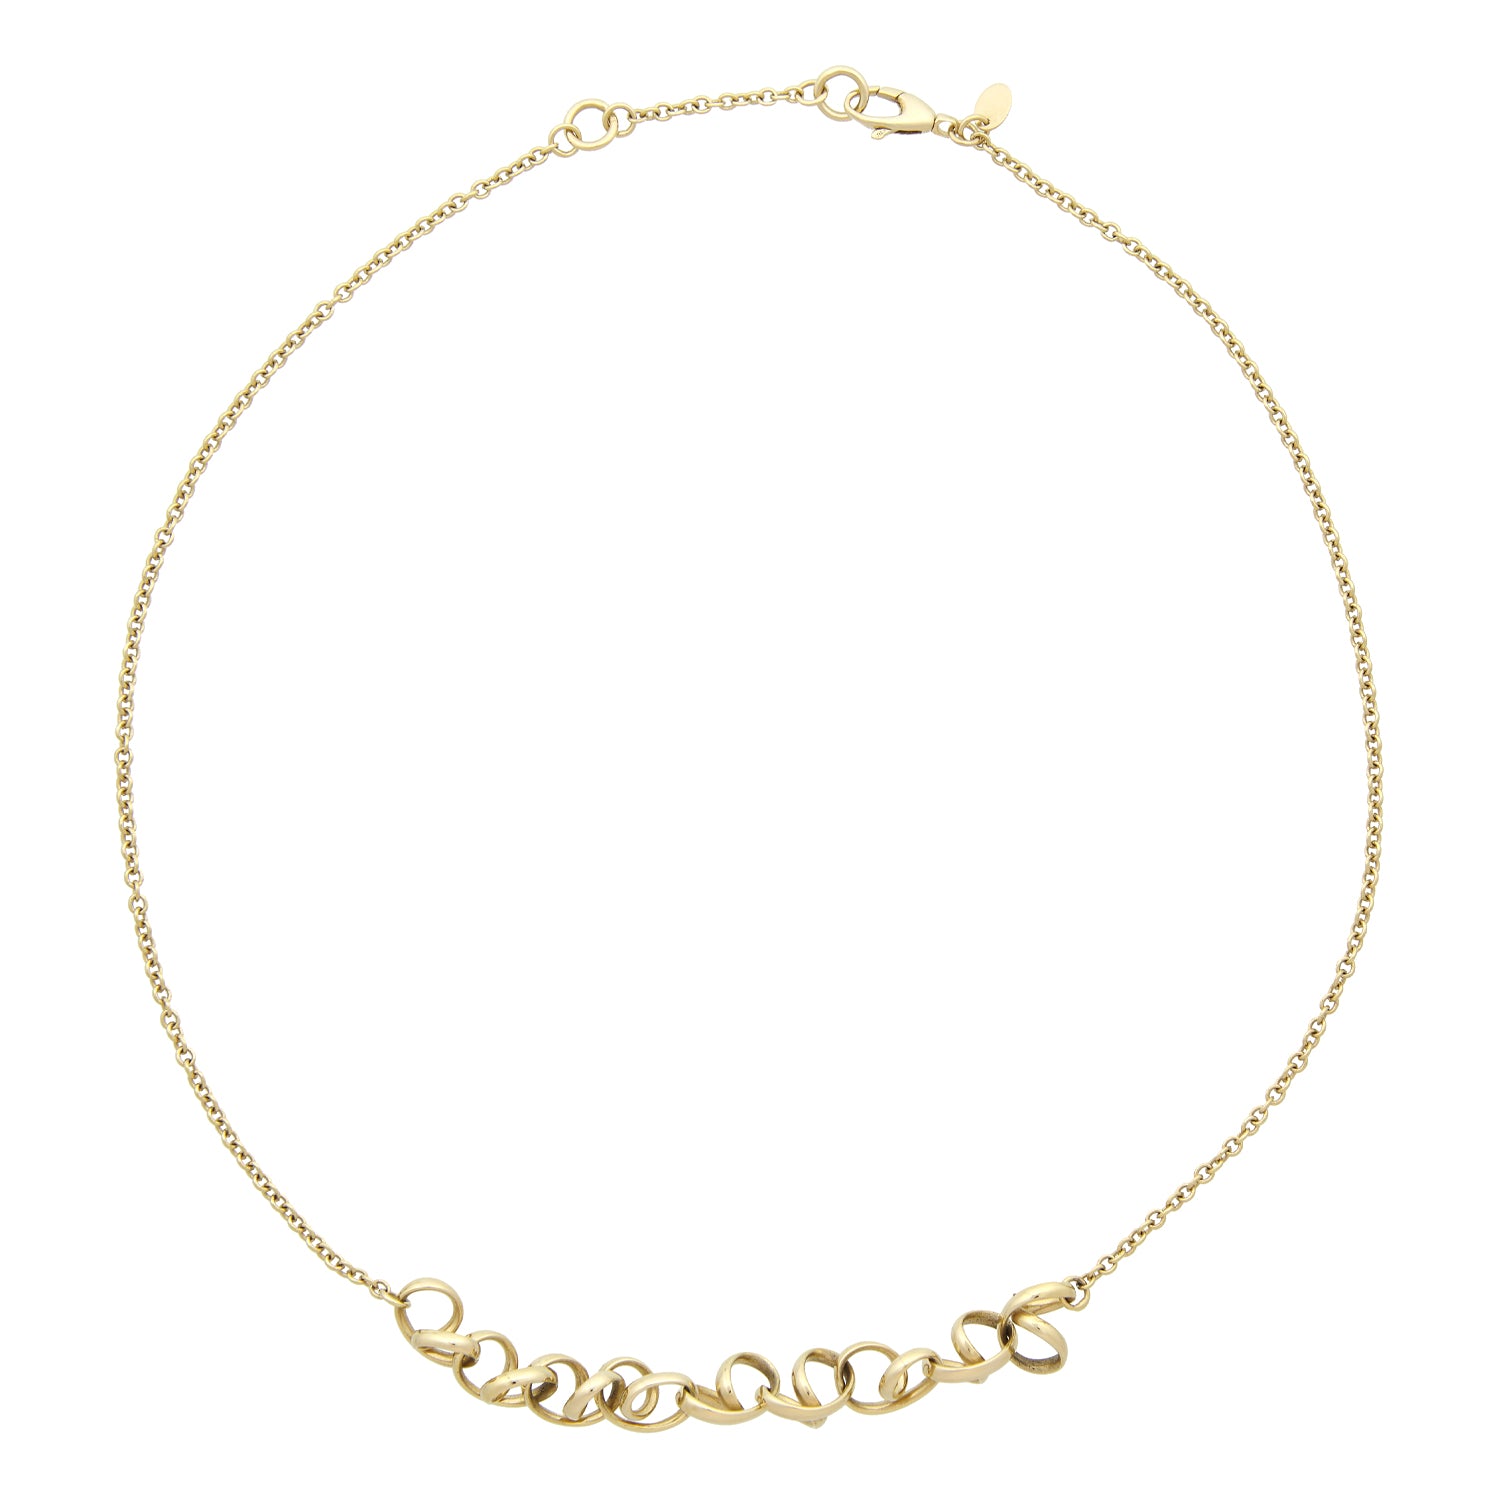 Yellow gold necklace with cheerful ornament.